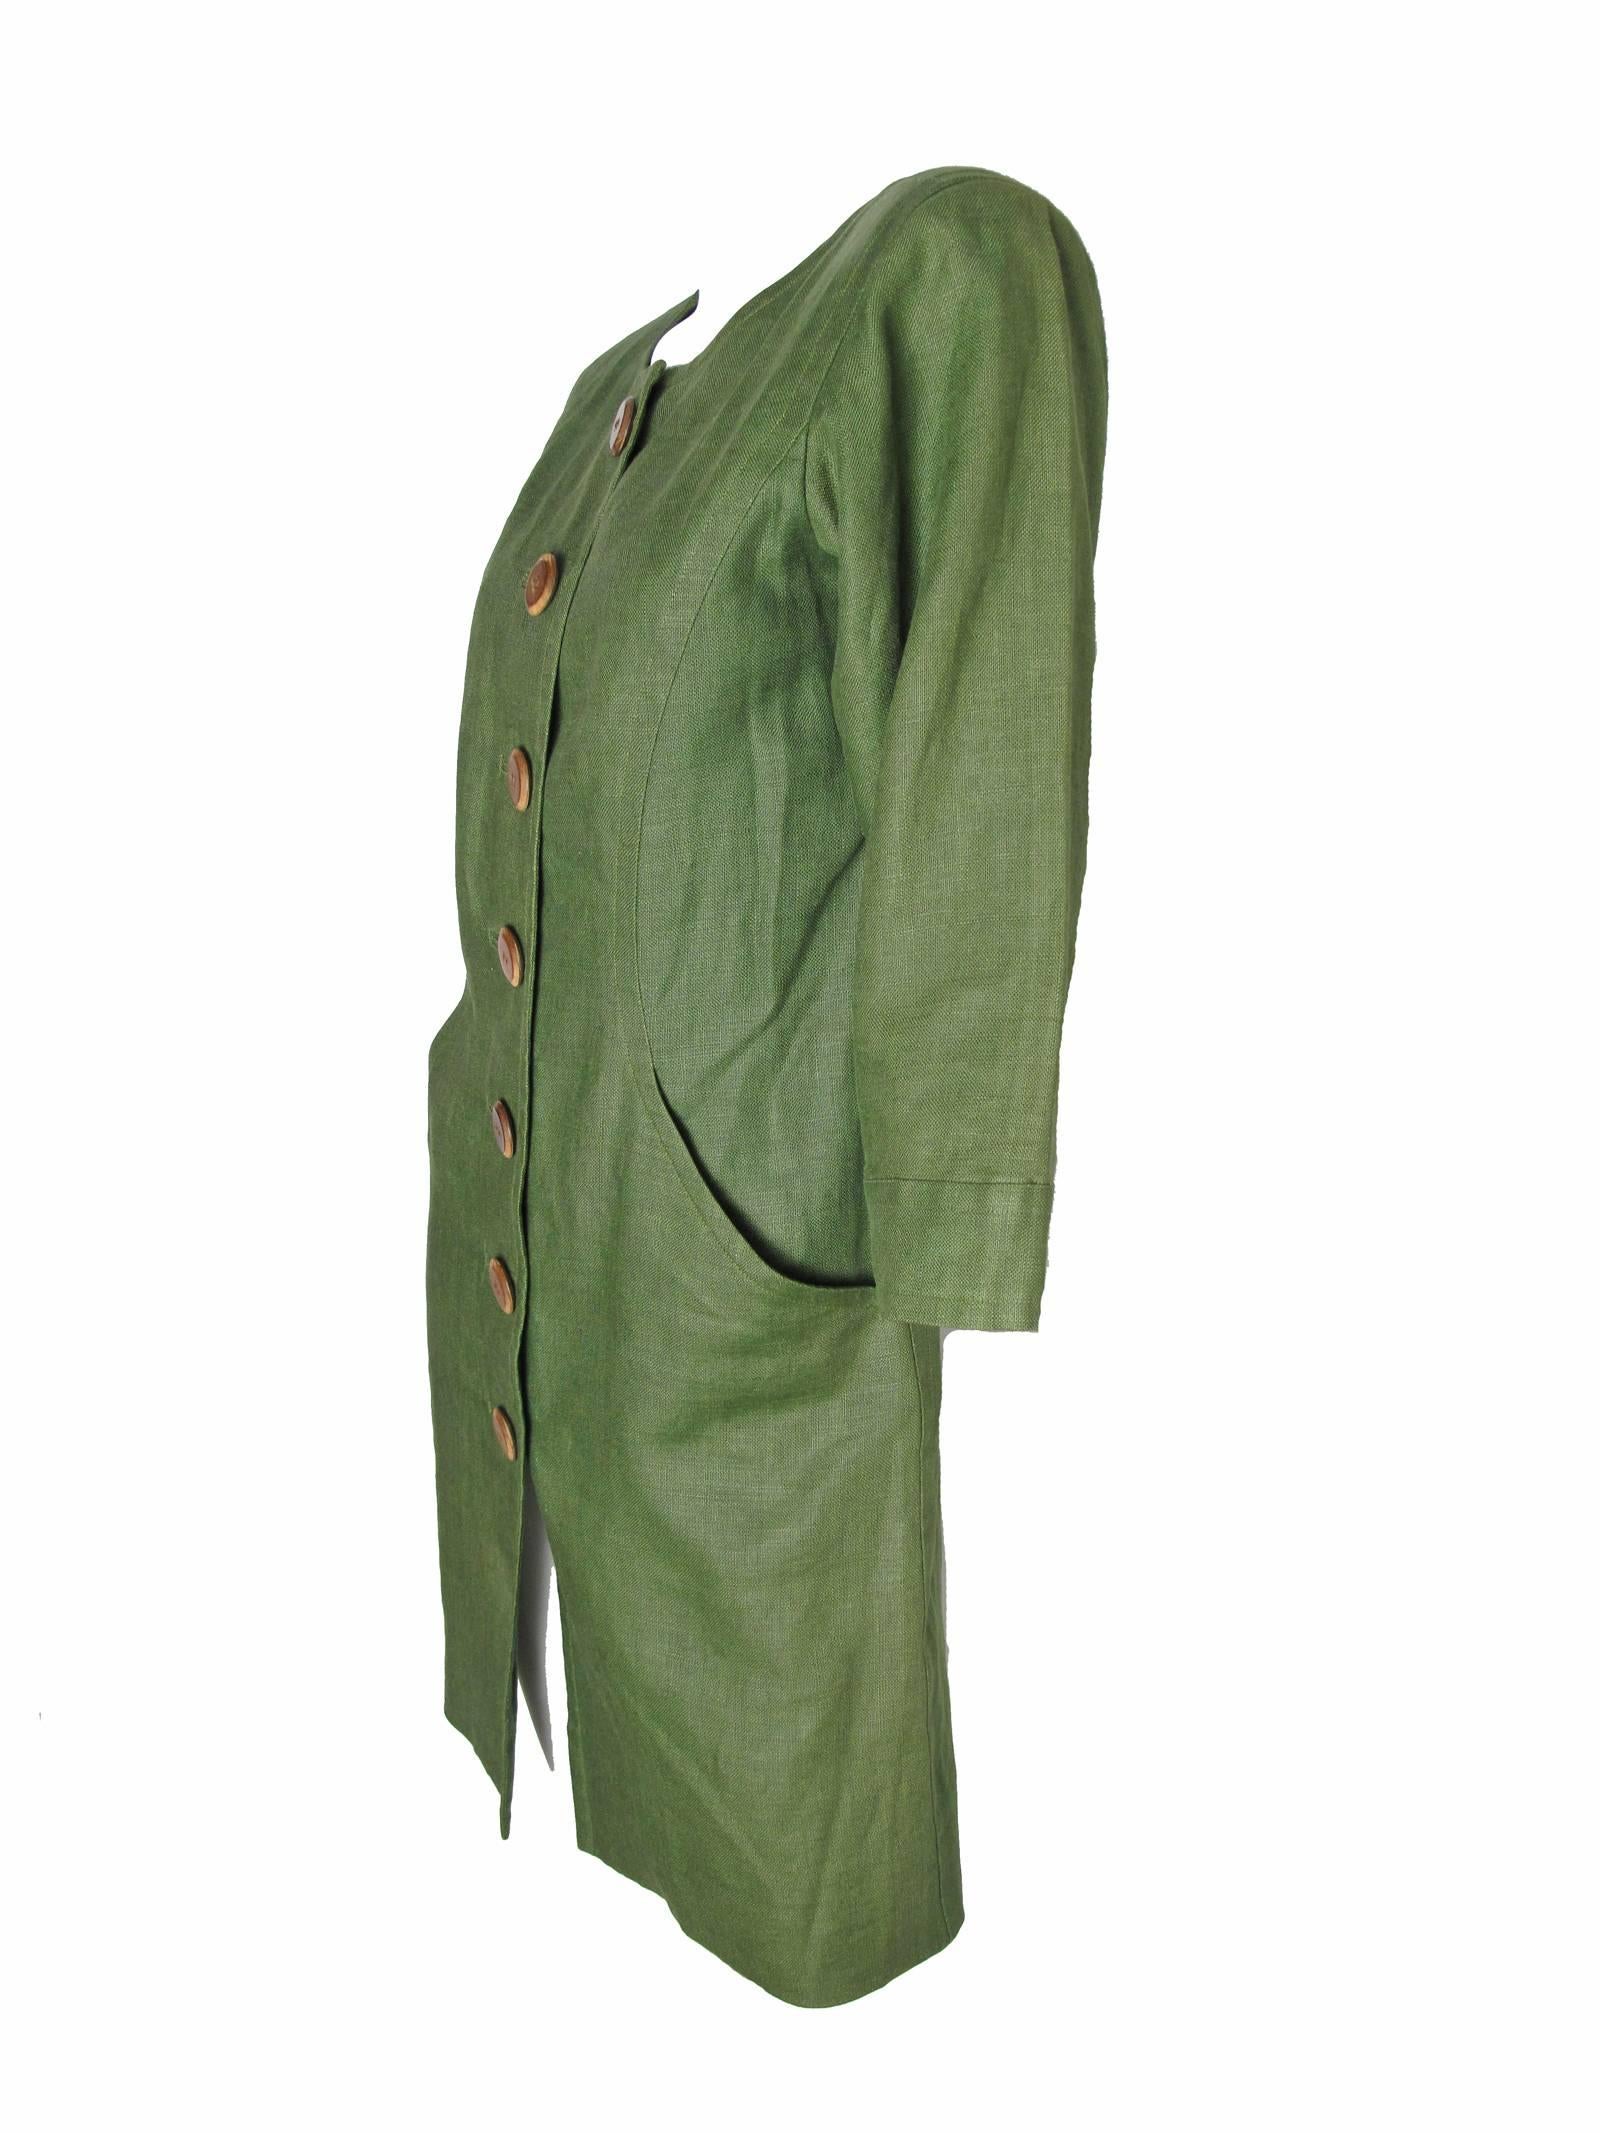 Yves Saint Laurent green linen dress, buttons down front.  Two side pockets.  Condition: Excellent. Size 34 / or current US 6 / 8
36" bust, 33" waist, 19"  sleeve, 37" hips, 36" length. 

We accept returns for refund, please